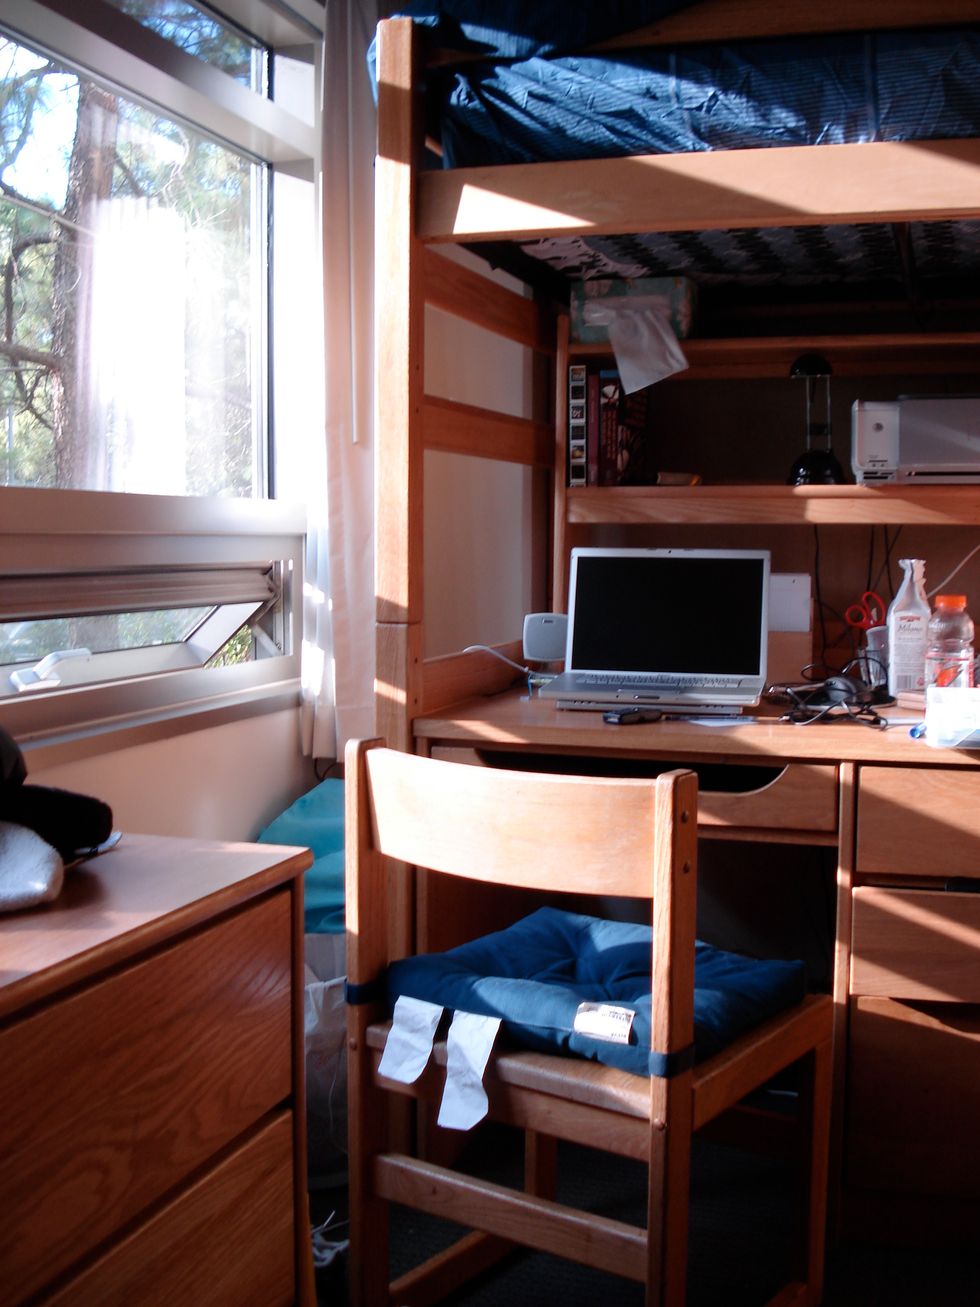 5 Thoughts That Occurred To Me While Packing up My Freshman Dorm